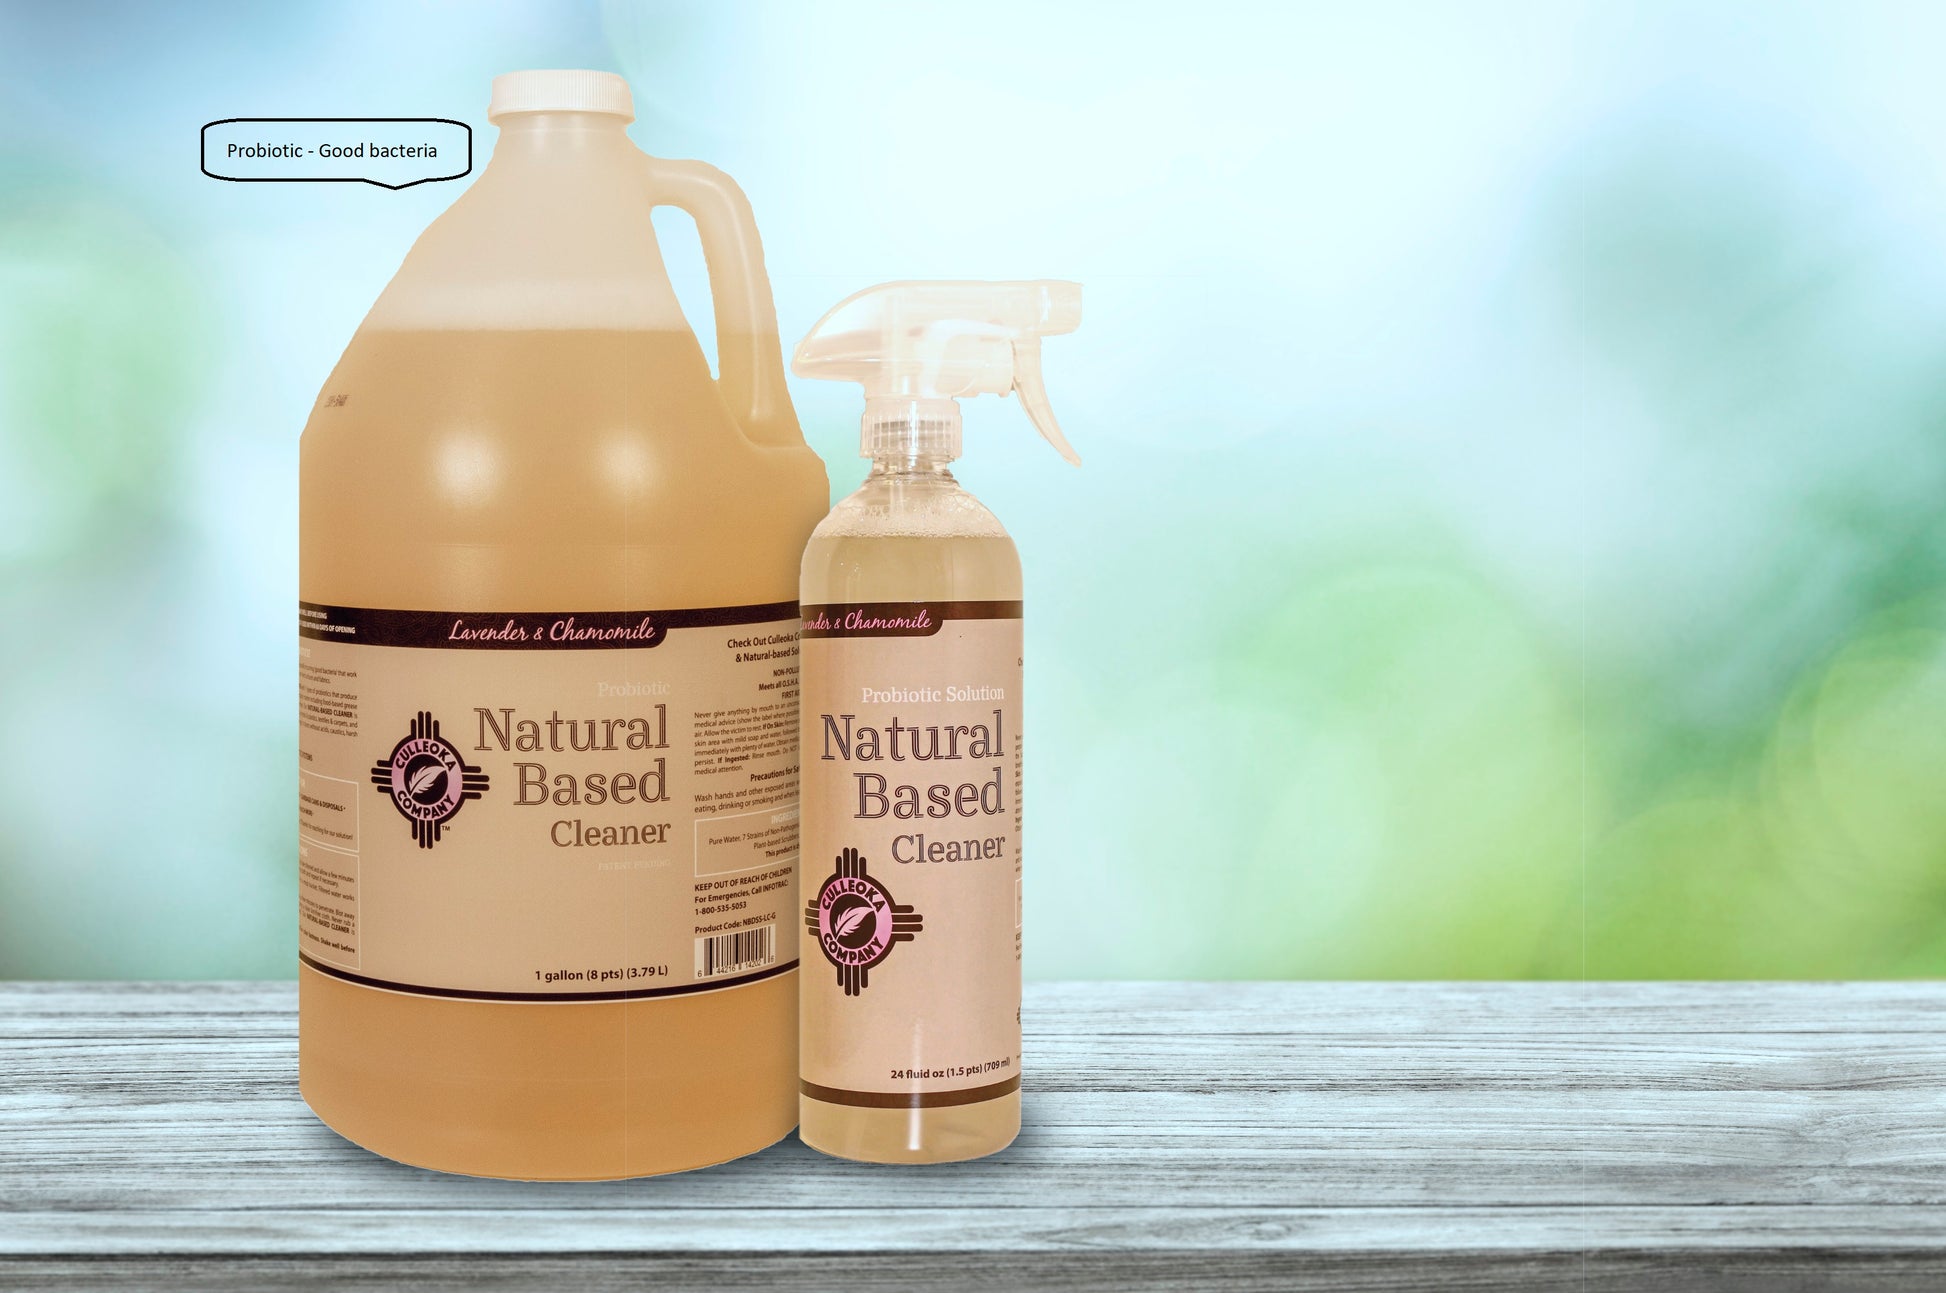 Natural Based Cleaner - Gallon and 24 oz